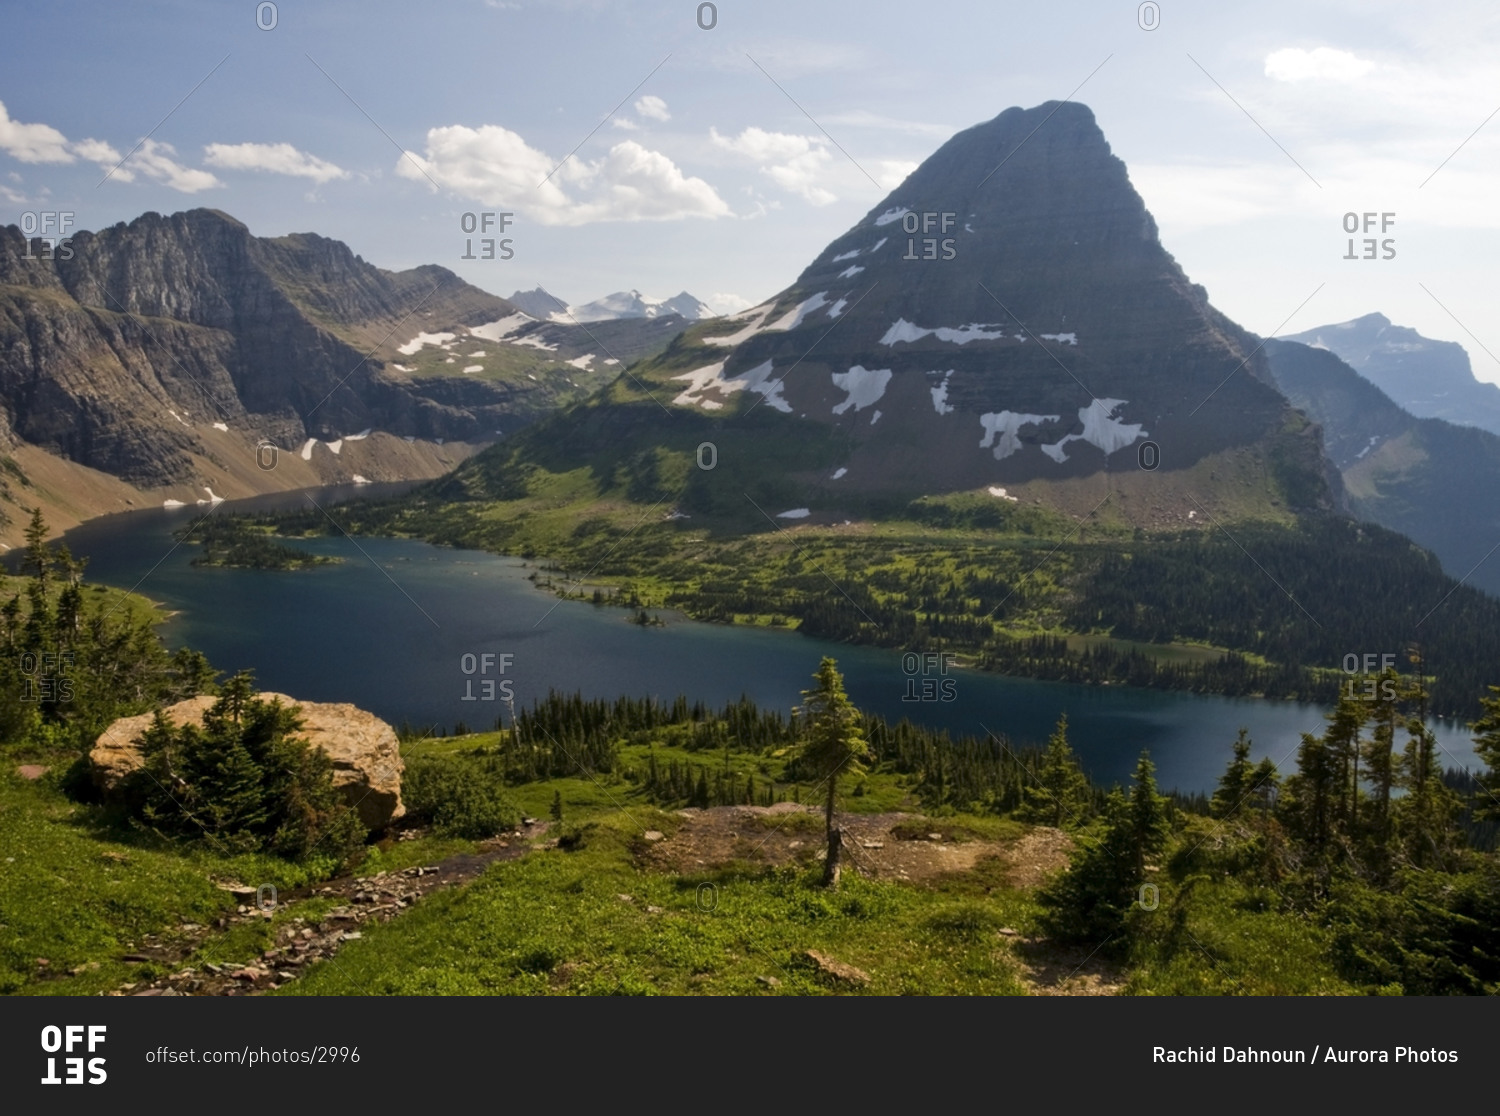 Bearhat Mountain is surrounded by Hidden Lake in Glacier National Park, Montana